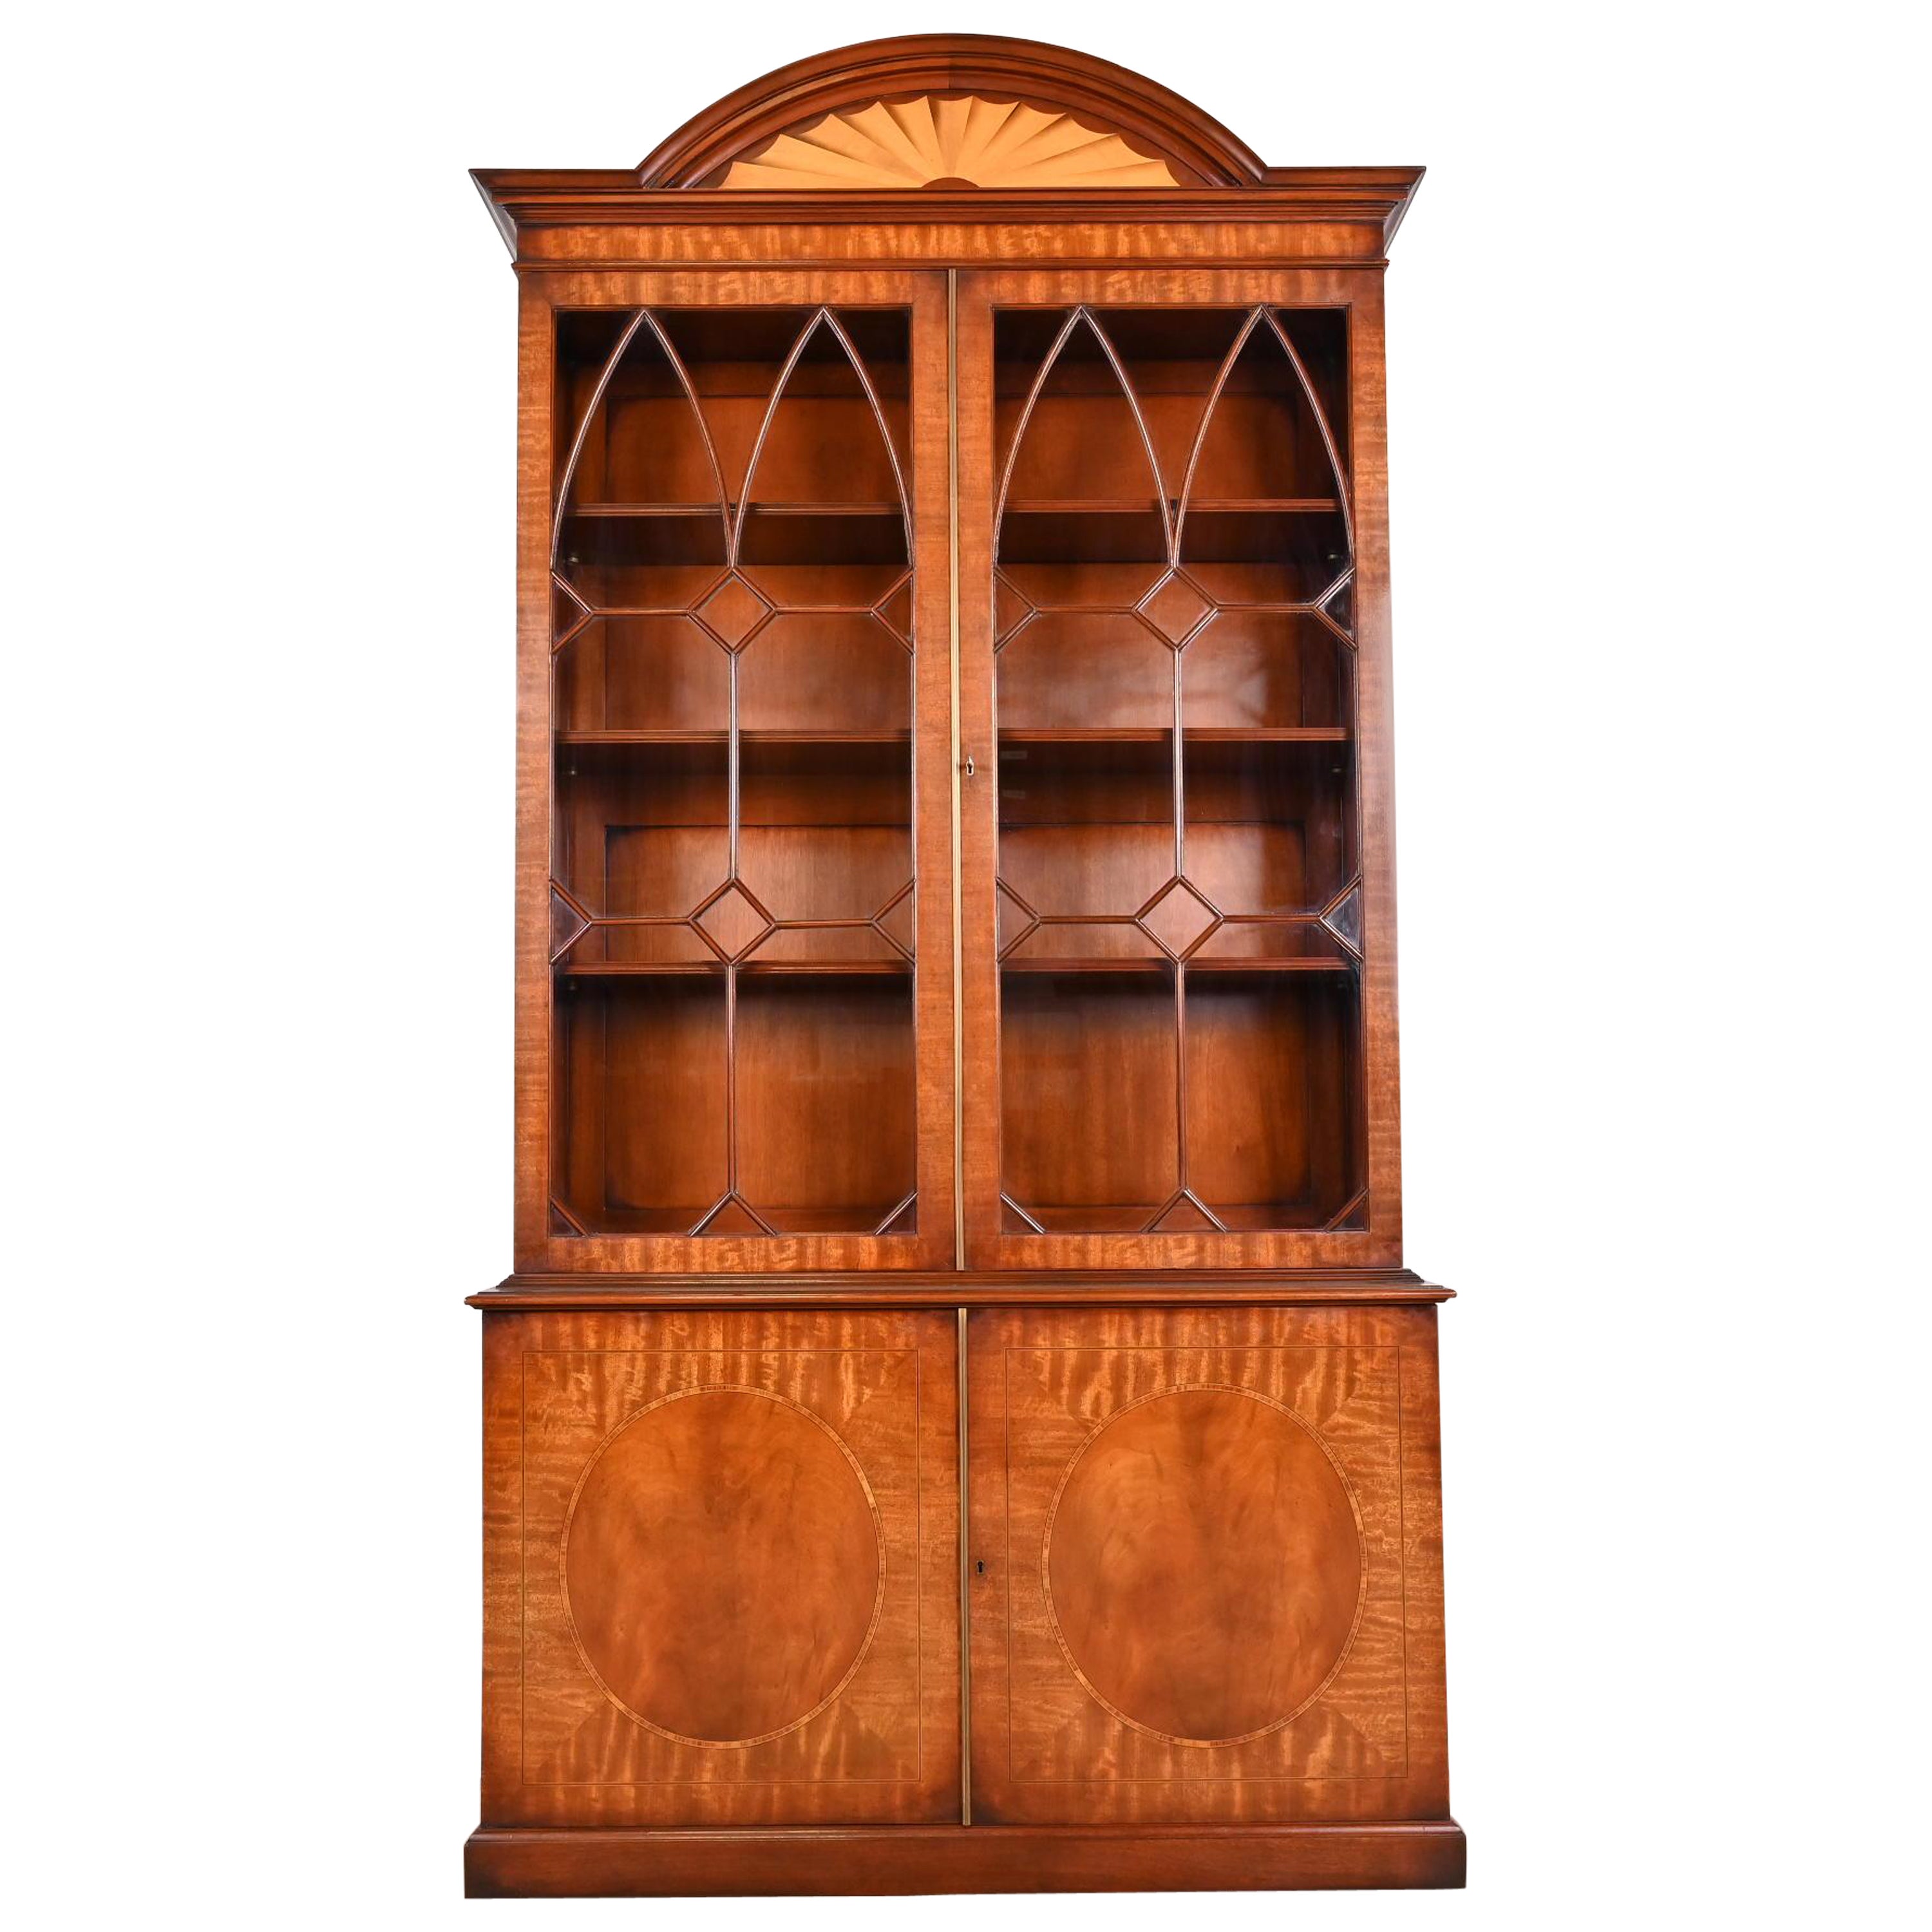 English Georgian Mahogany Breakfront Bookcase by Restall Brown & Clennell